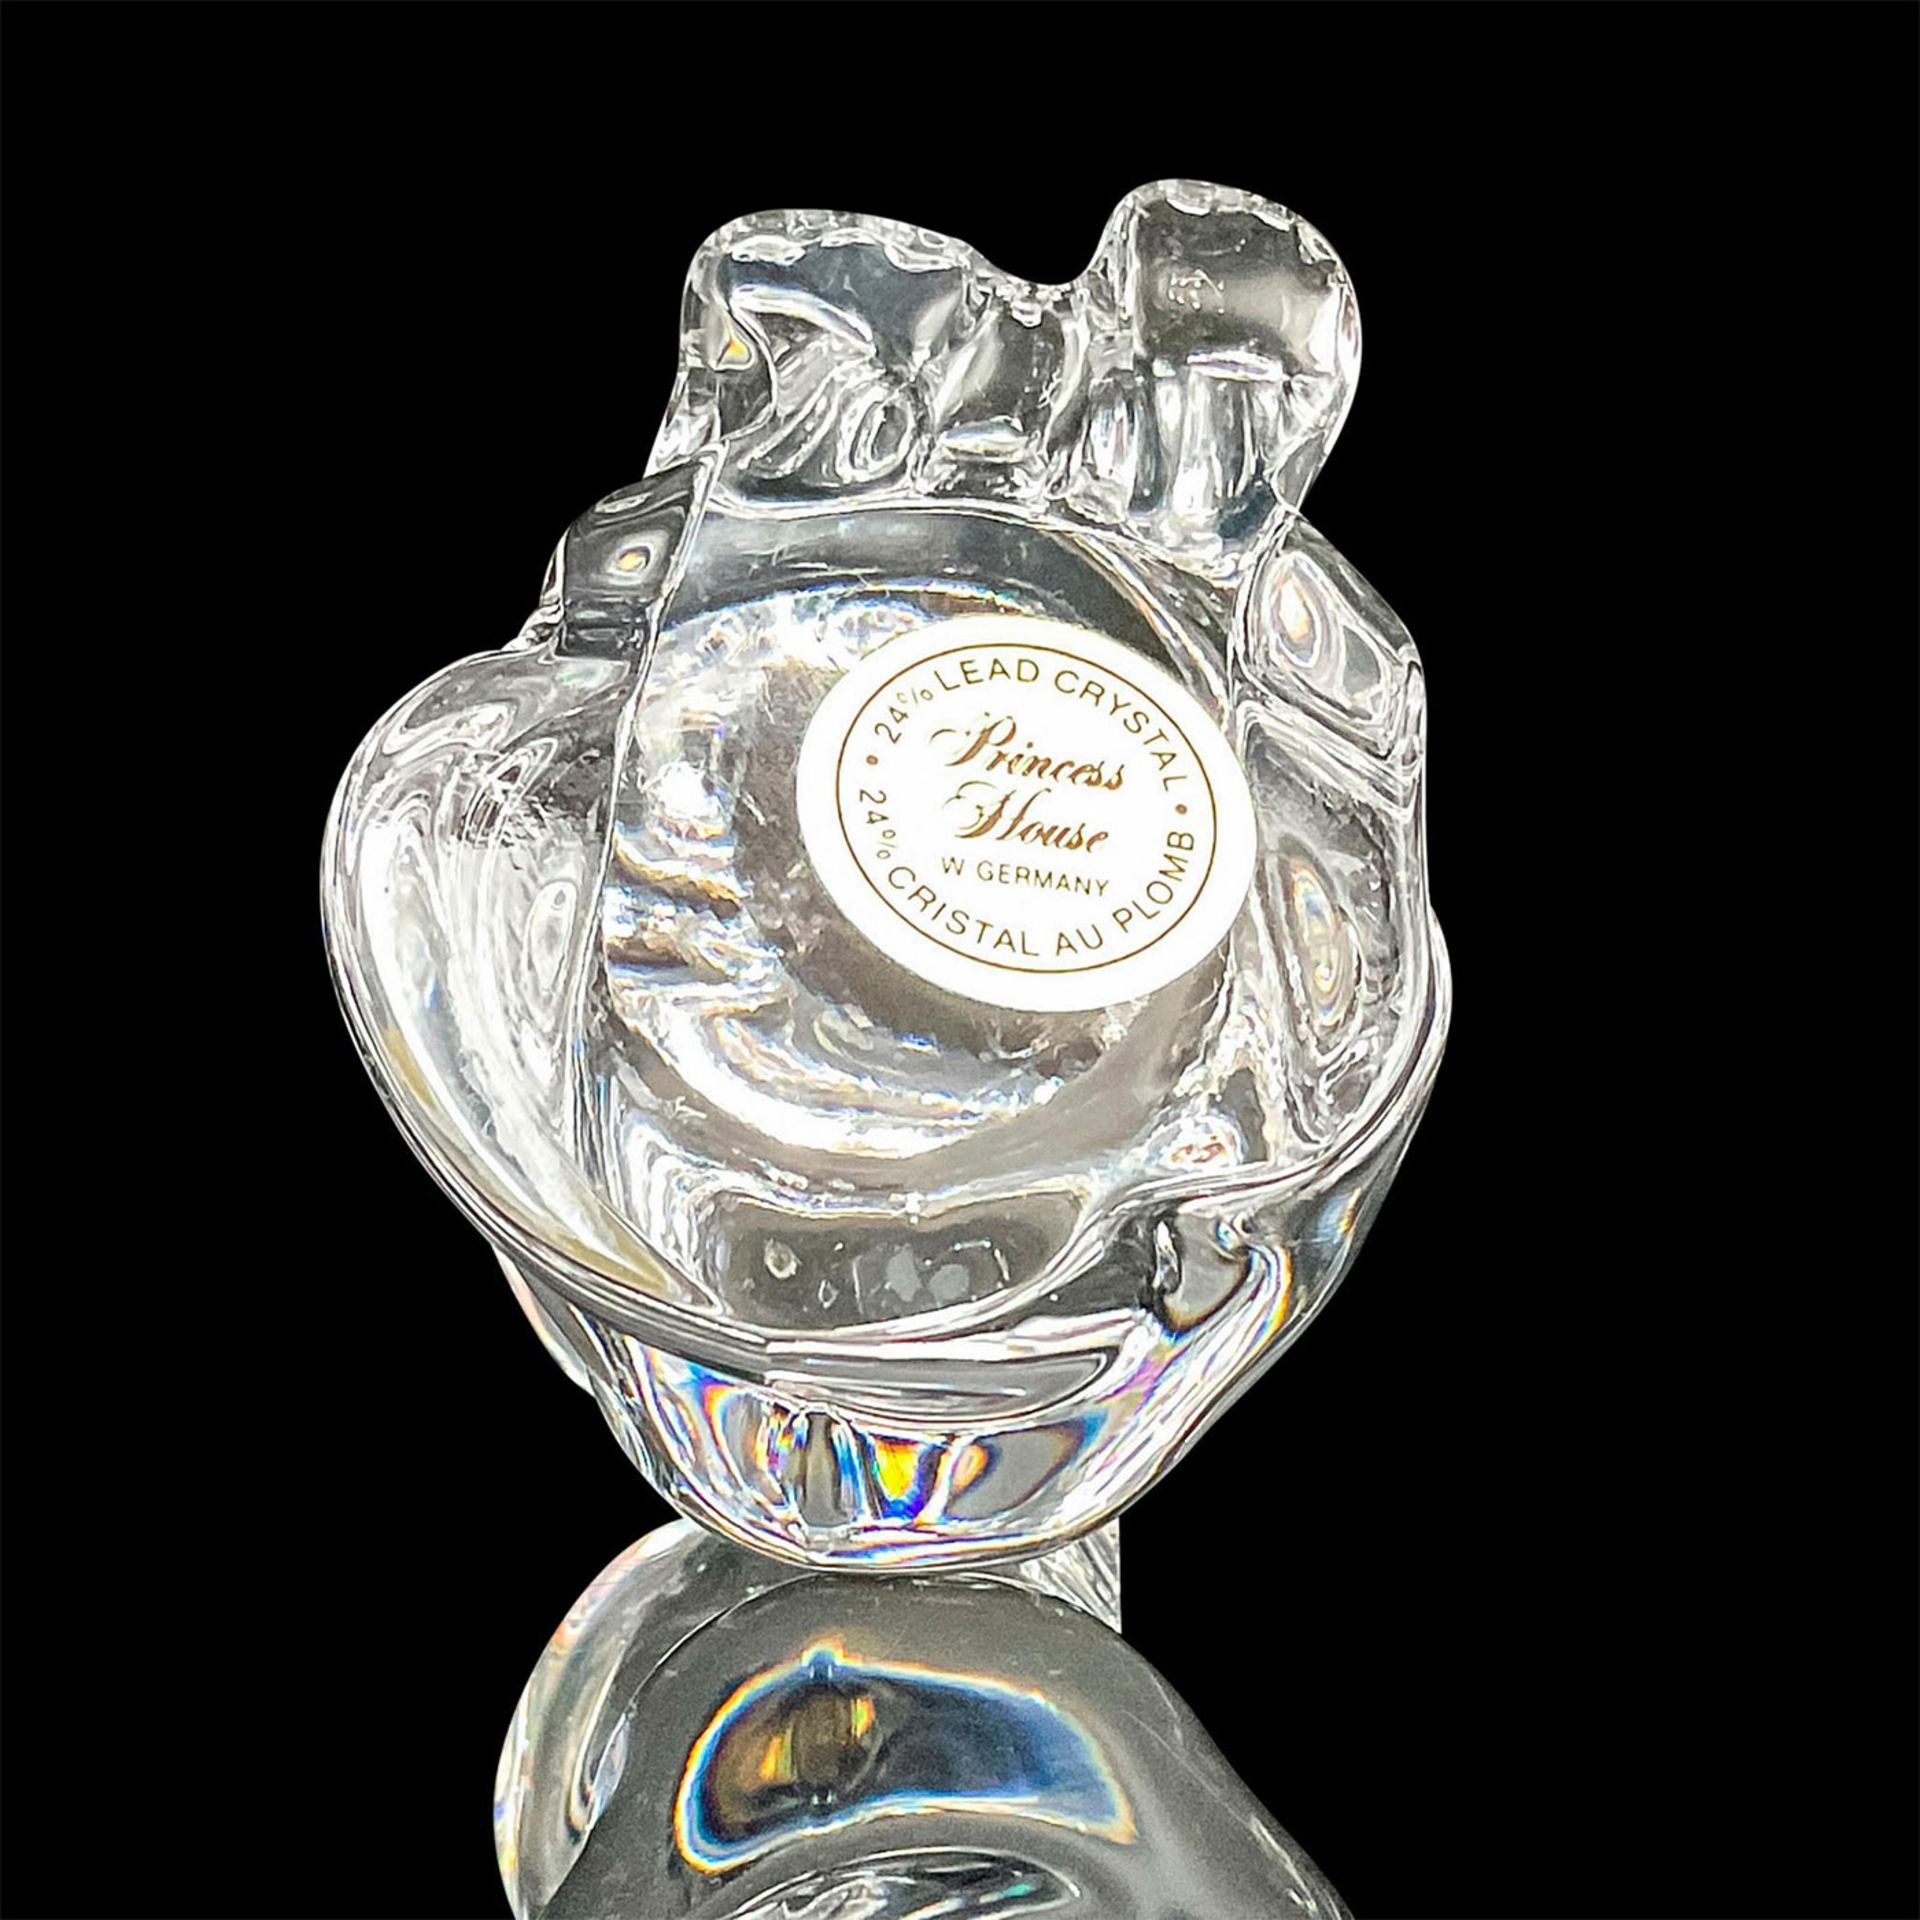 Princess House Lead Crystal Small Cat Figure - Image 3 of 5